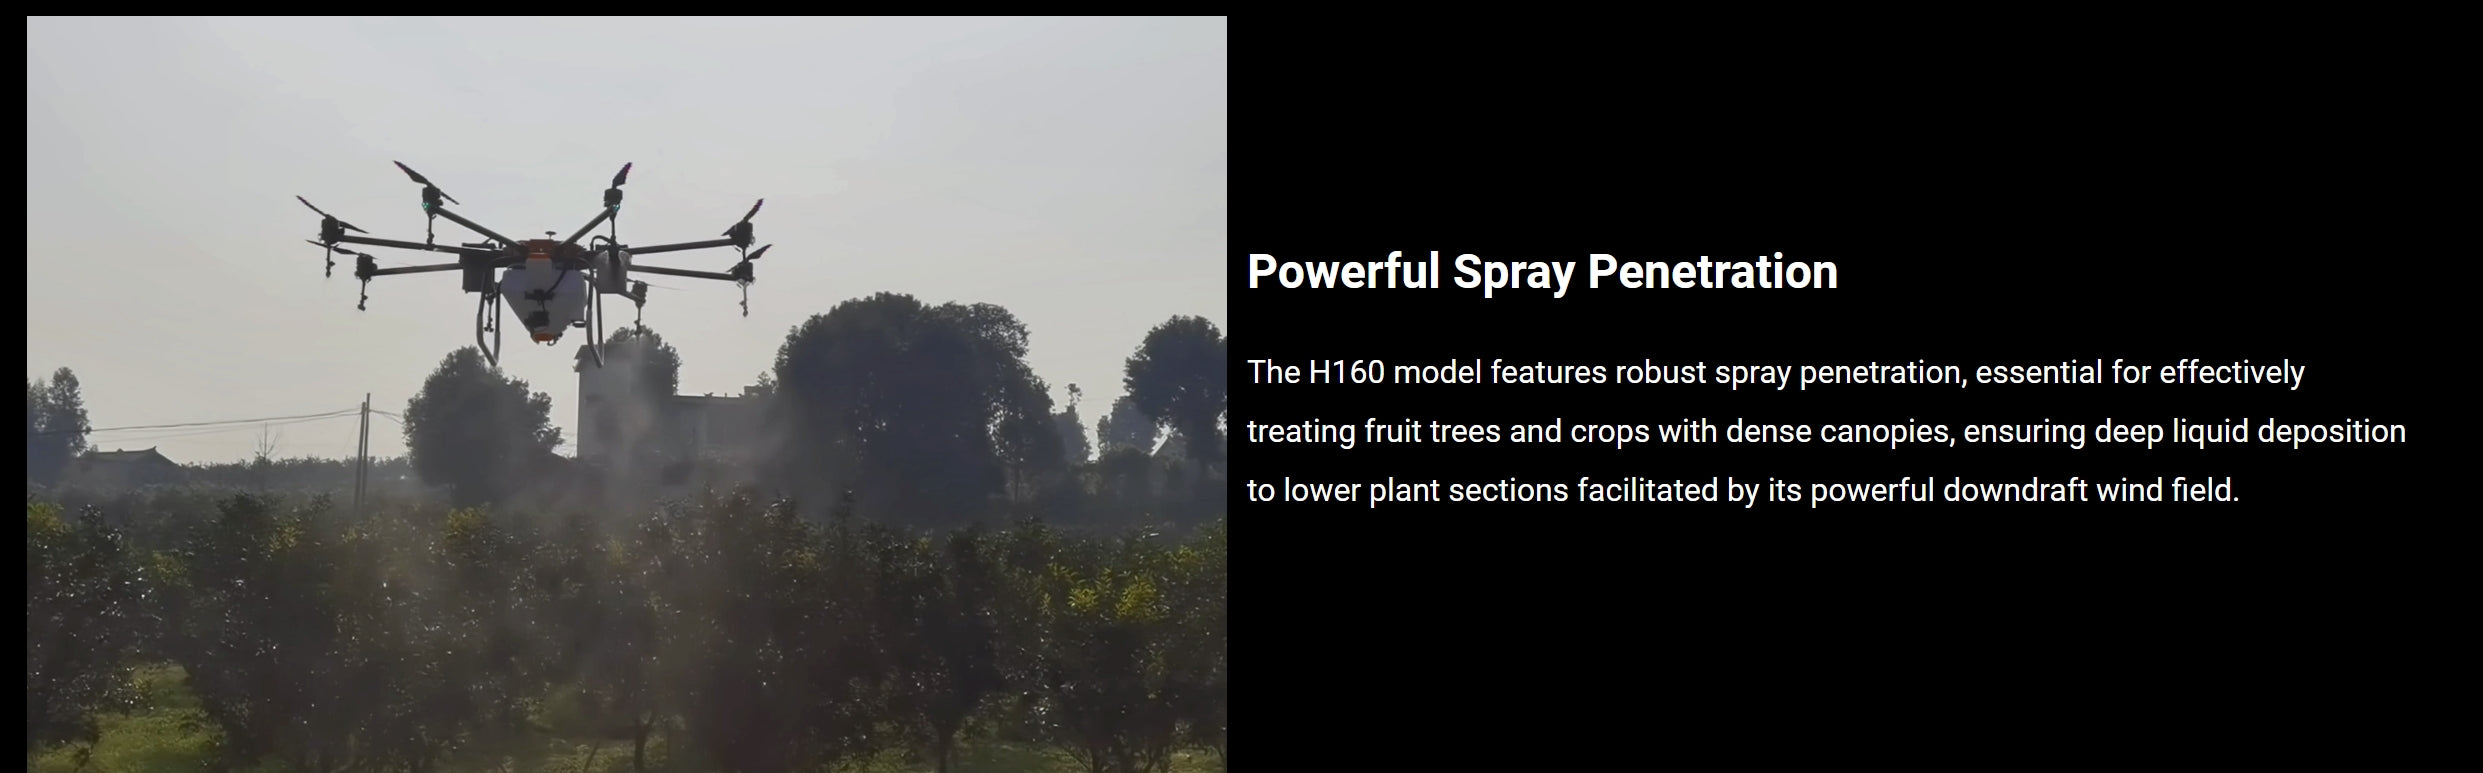 H160 Agricultural Drone, Powerful Spray Penetration The H160 model features robust spray penetration, essential for treating fruit